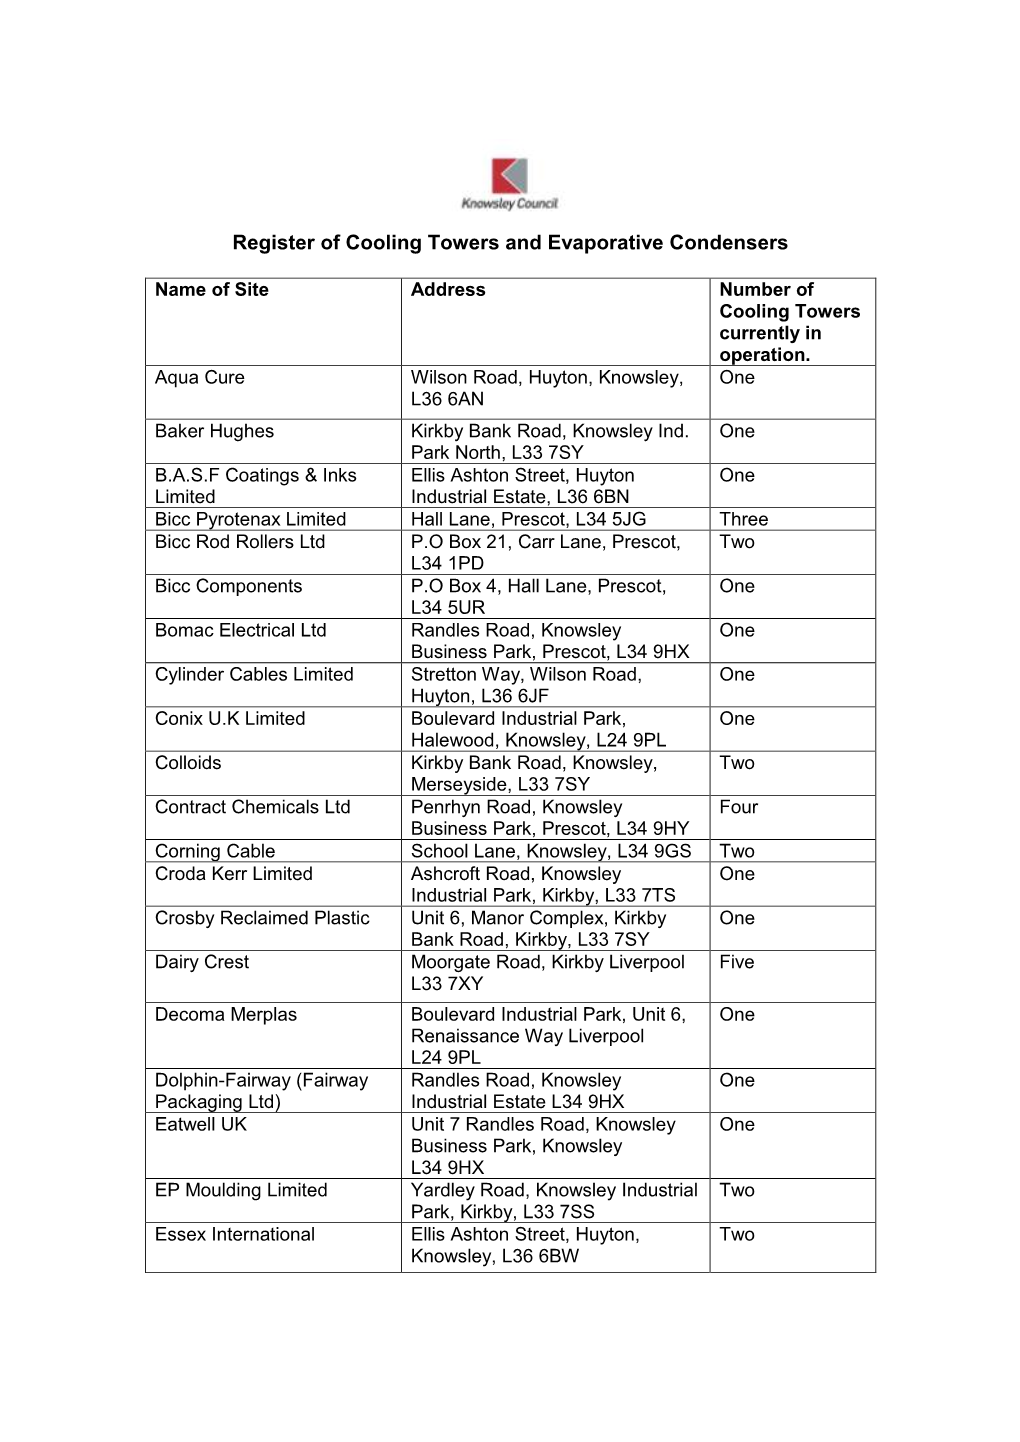 Register of Cooling Towers and Evaporative Condensers